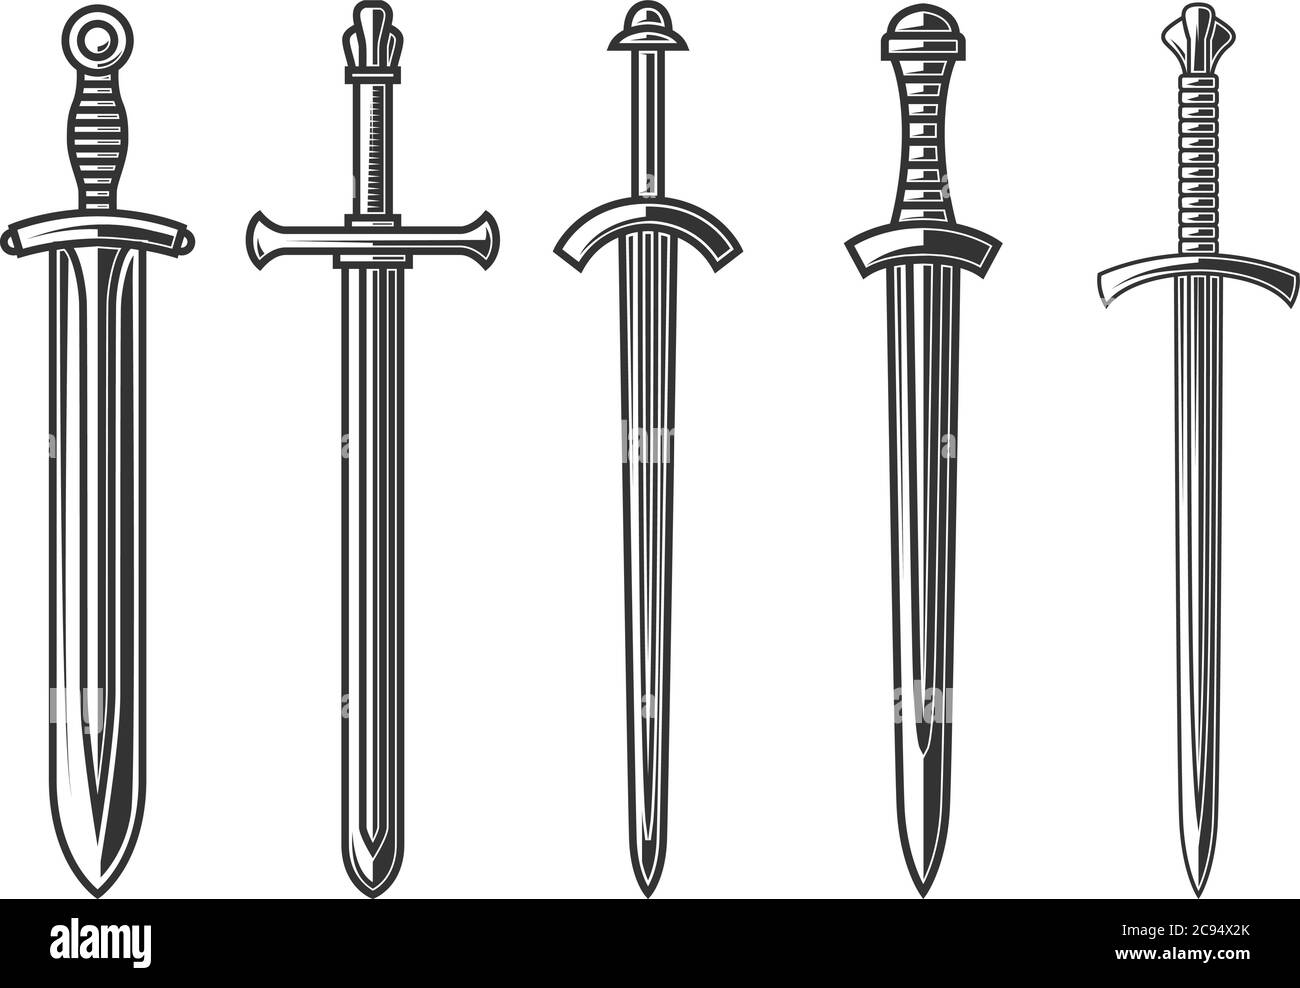 Set of illustrations of ancient swords in engraving style. Design element for logo, label, sign, poster, t shirt. Vector illustration Stock Vector